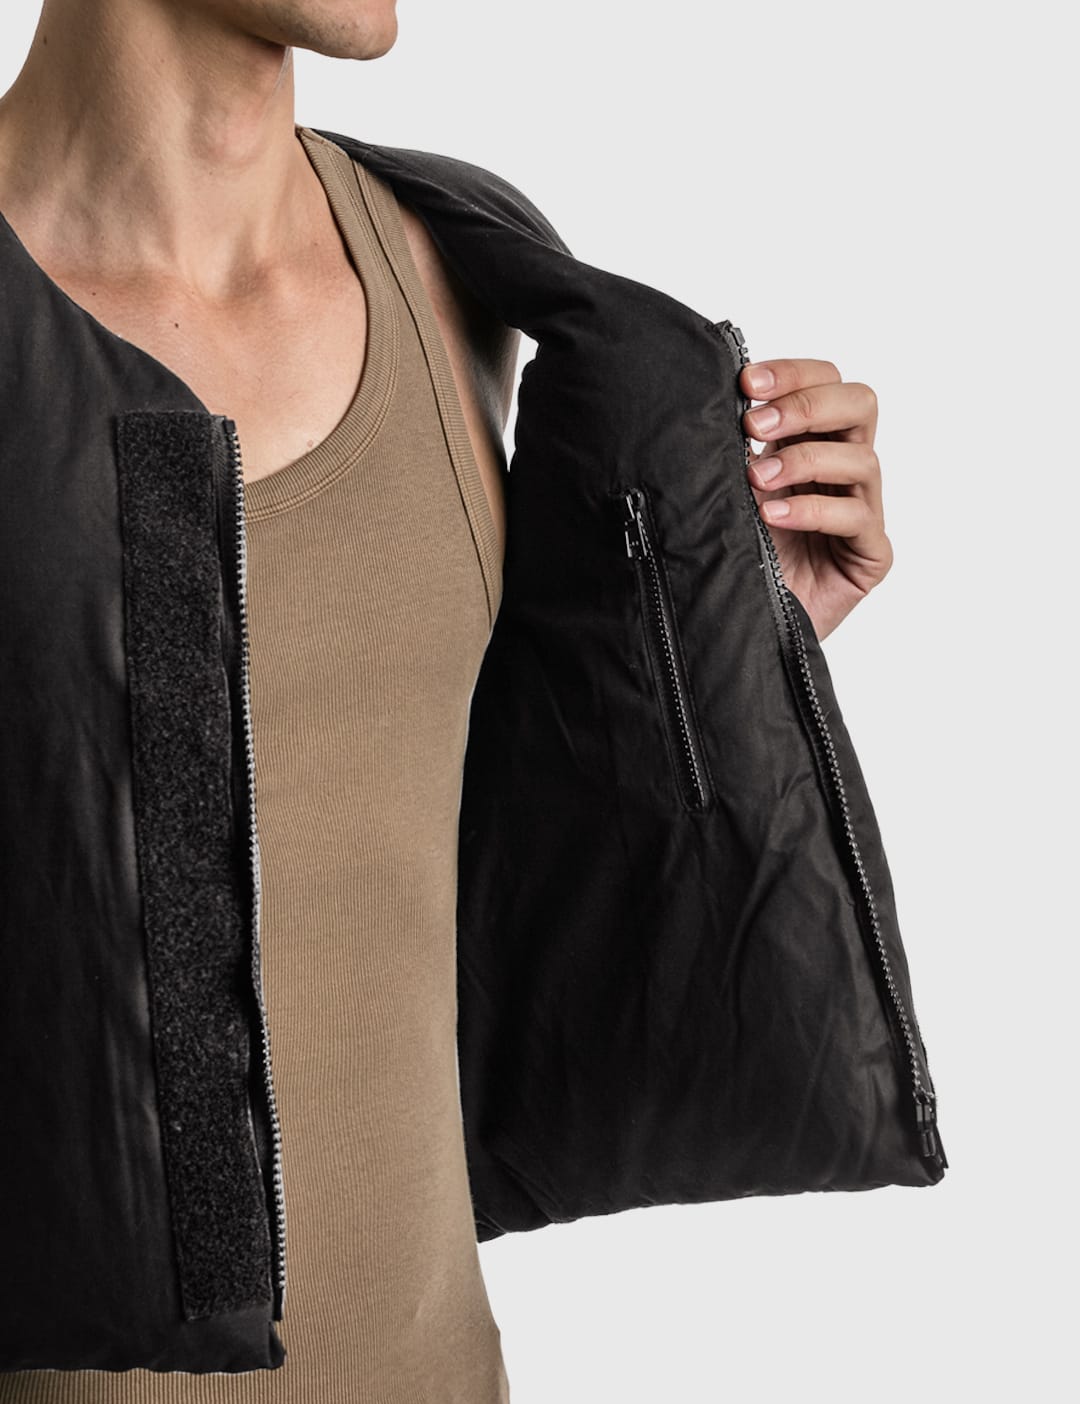 Entire Studios - PILLOW VEST | HBX - Globally Curated Fashion and